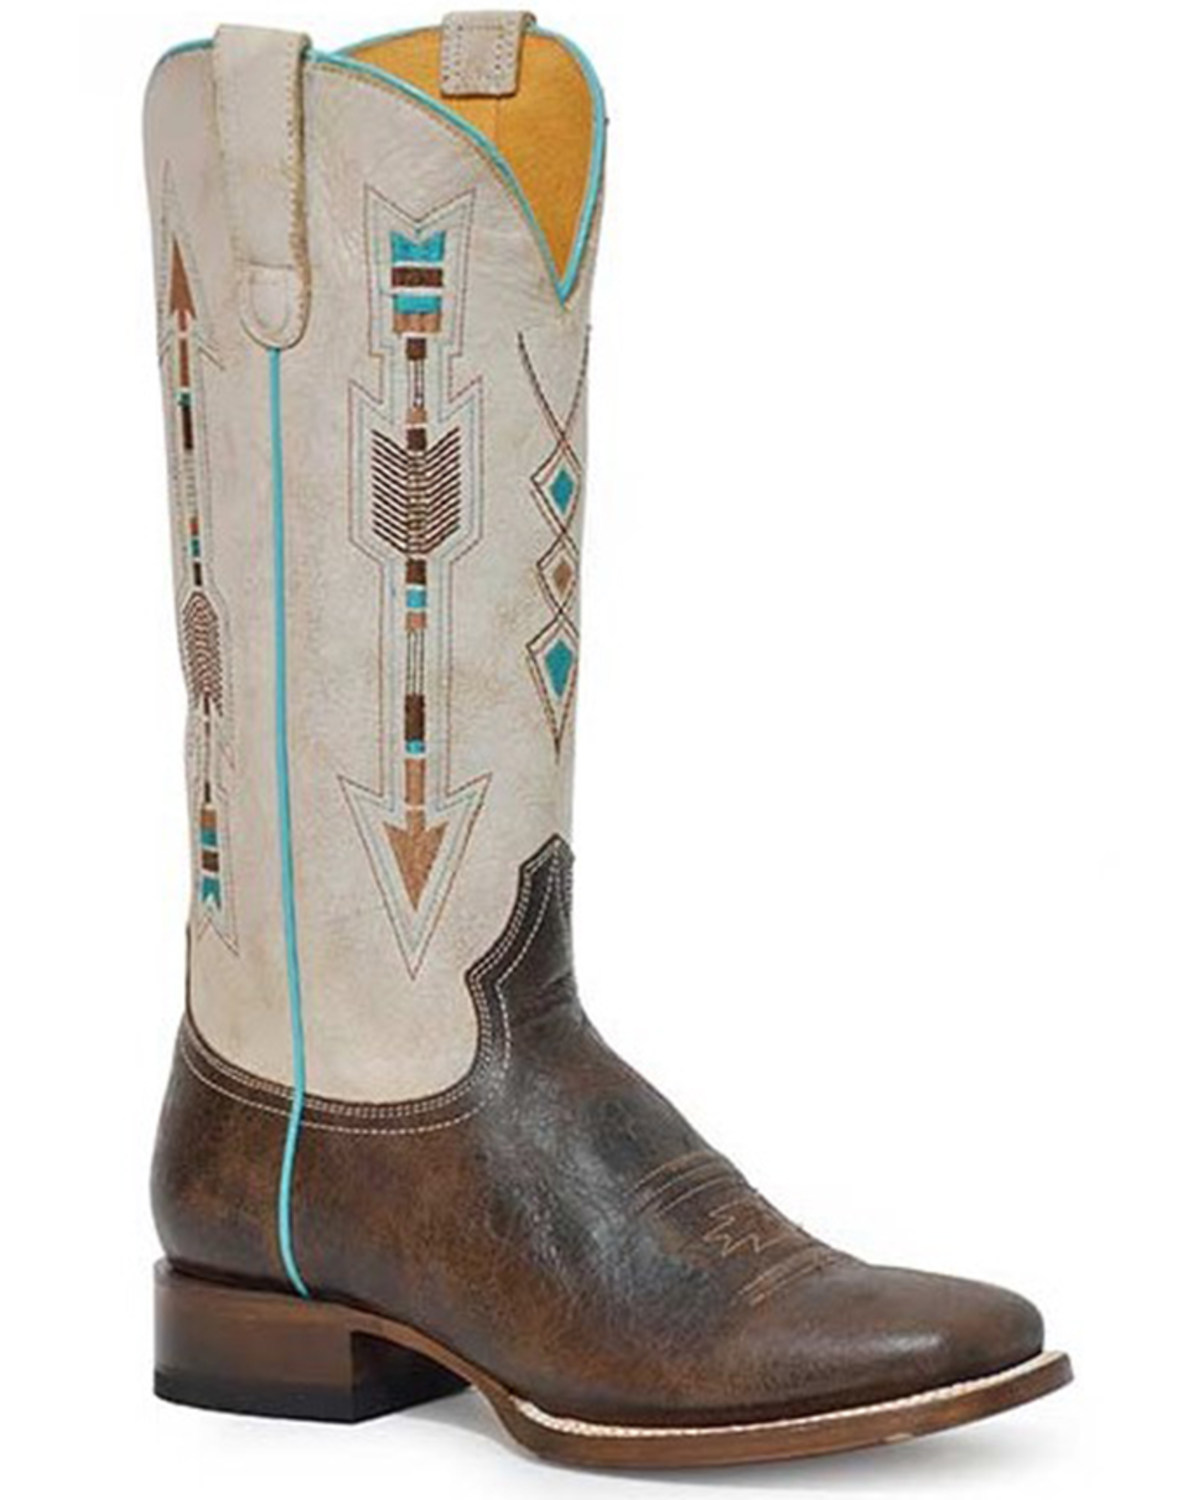 Roper Women's Arrows Embroidered Vintage Western Boots - Square Toe